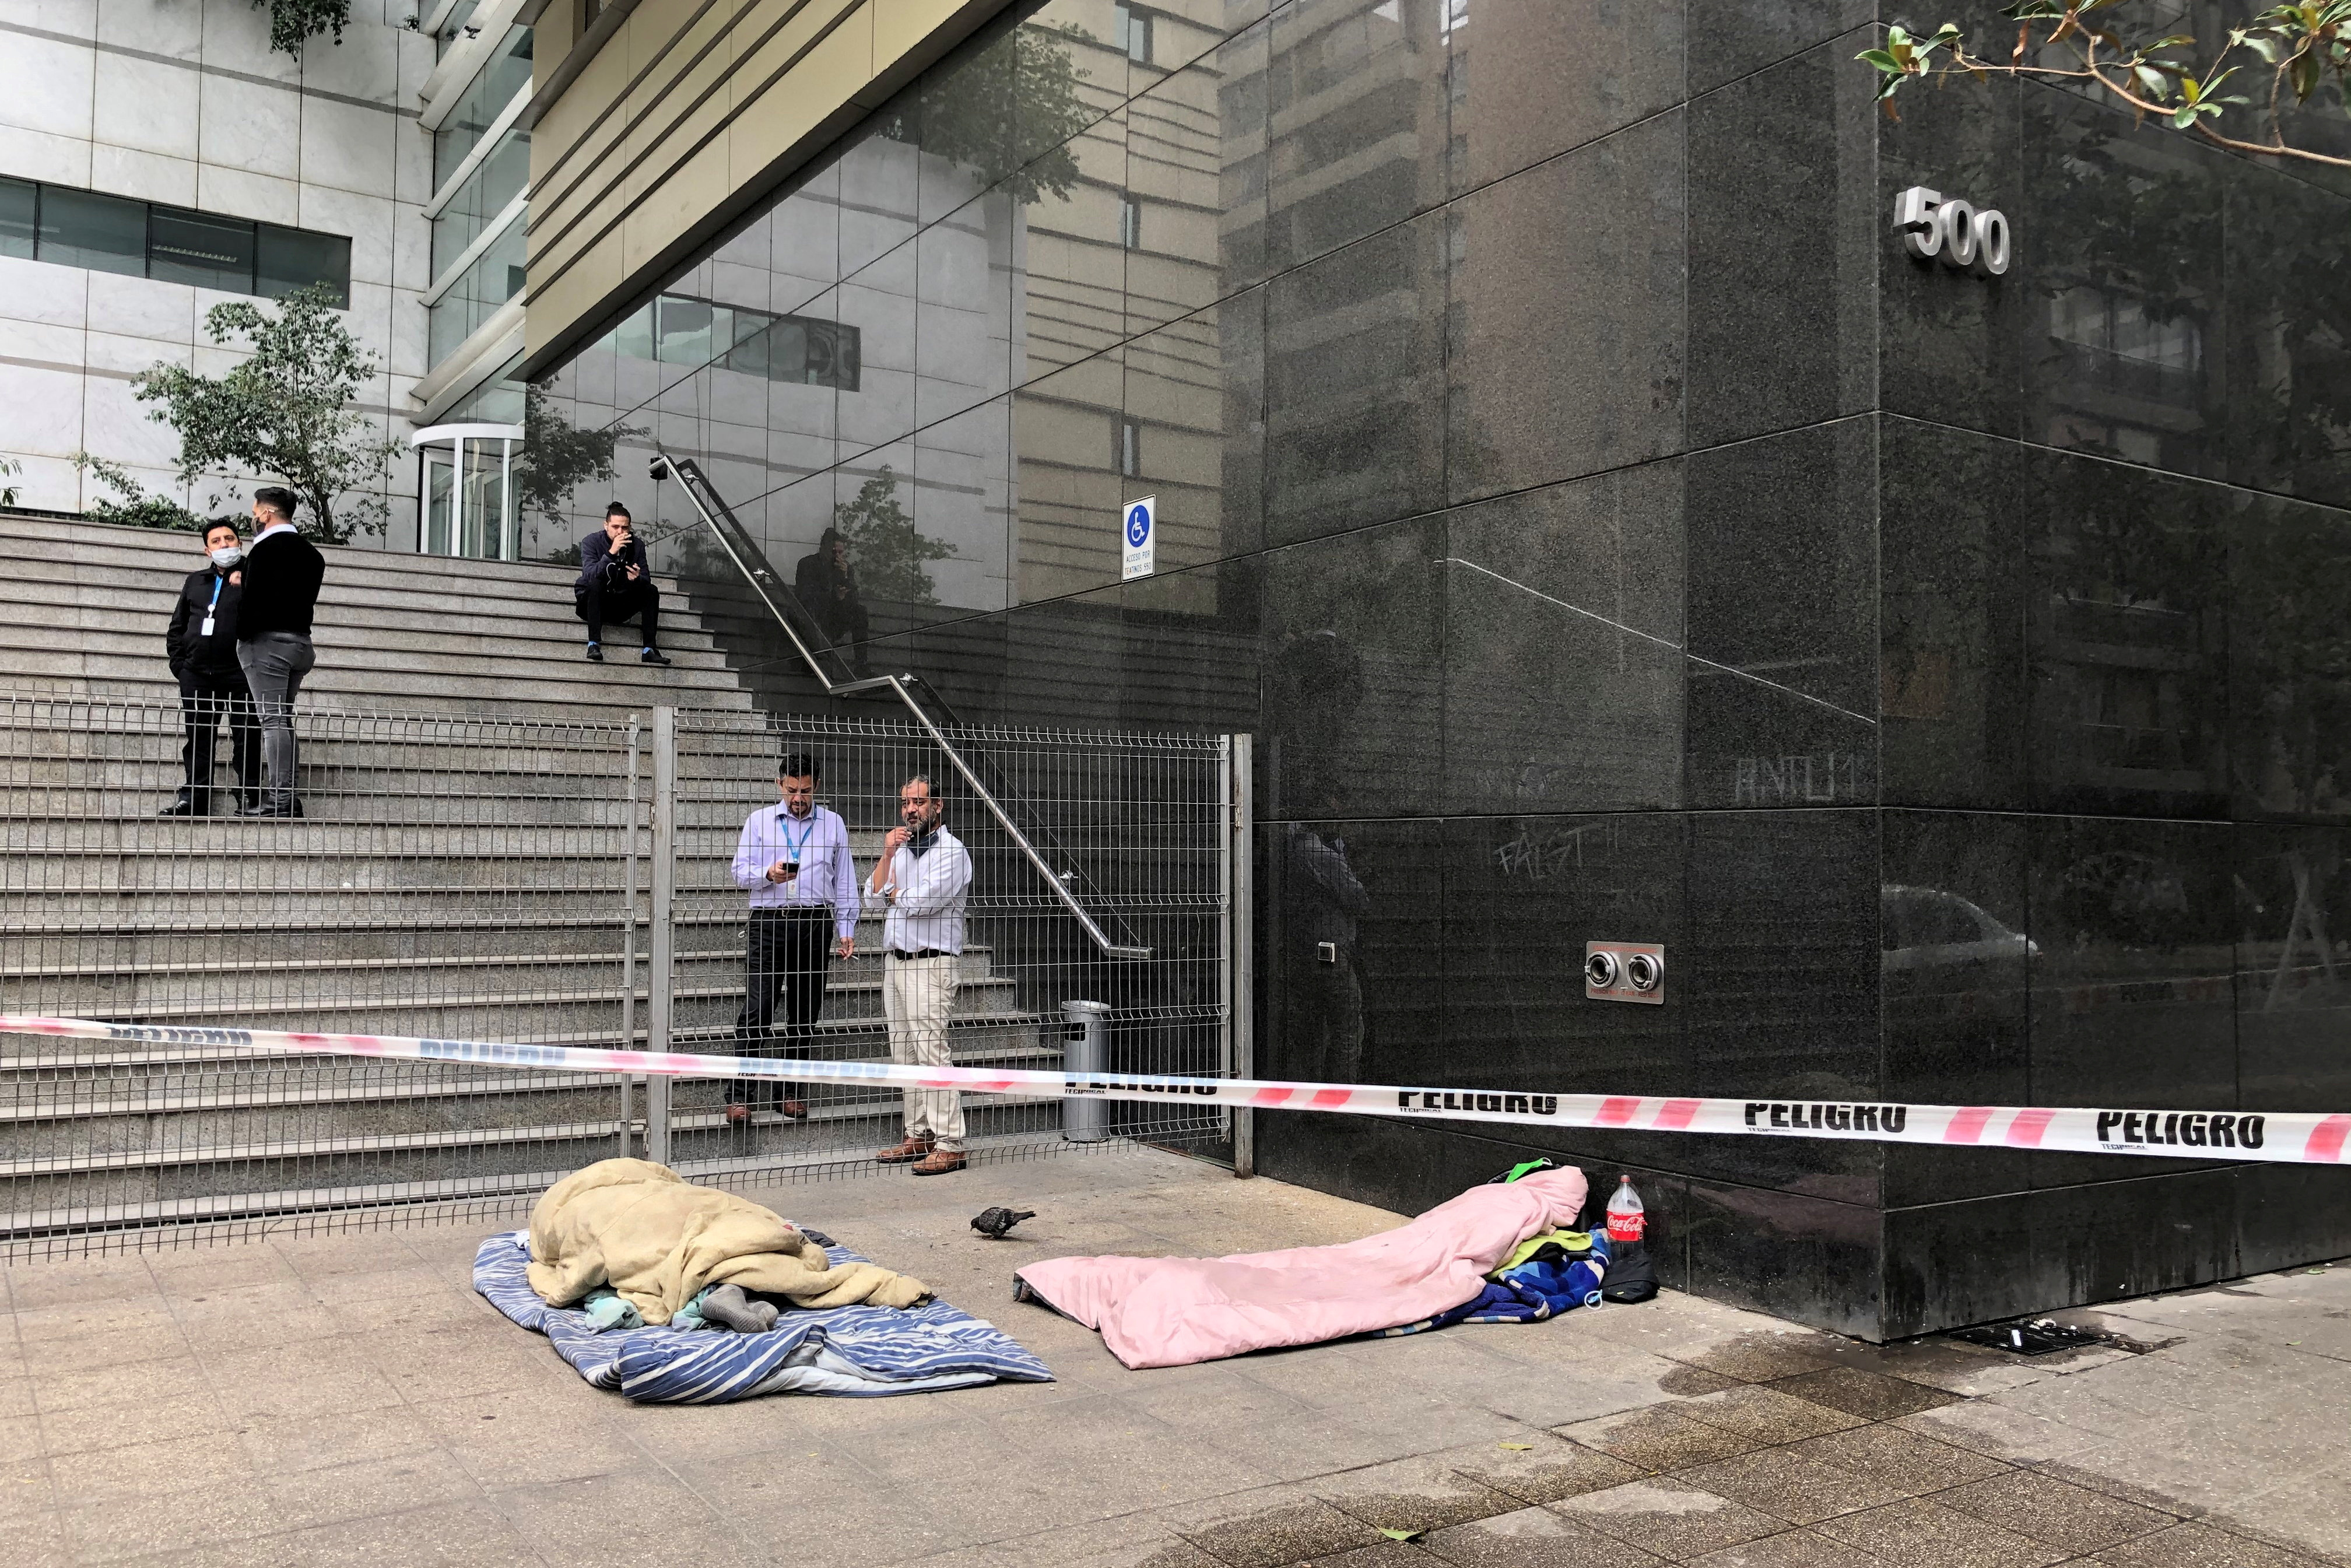 Workers take a break as homeless people sleep behind barricade tape outside an office building in downtown Santiago